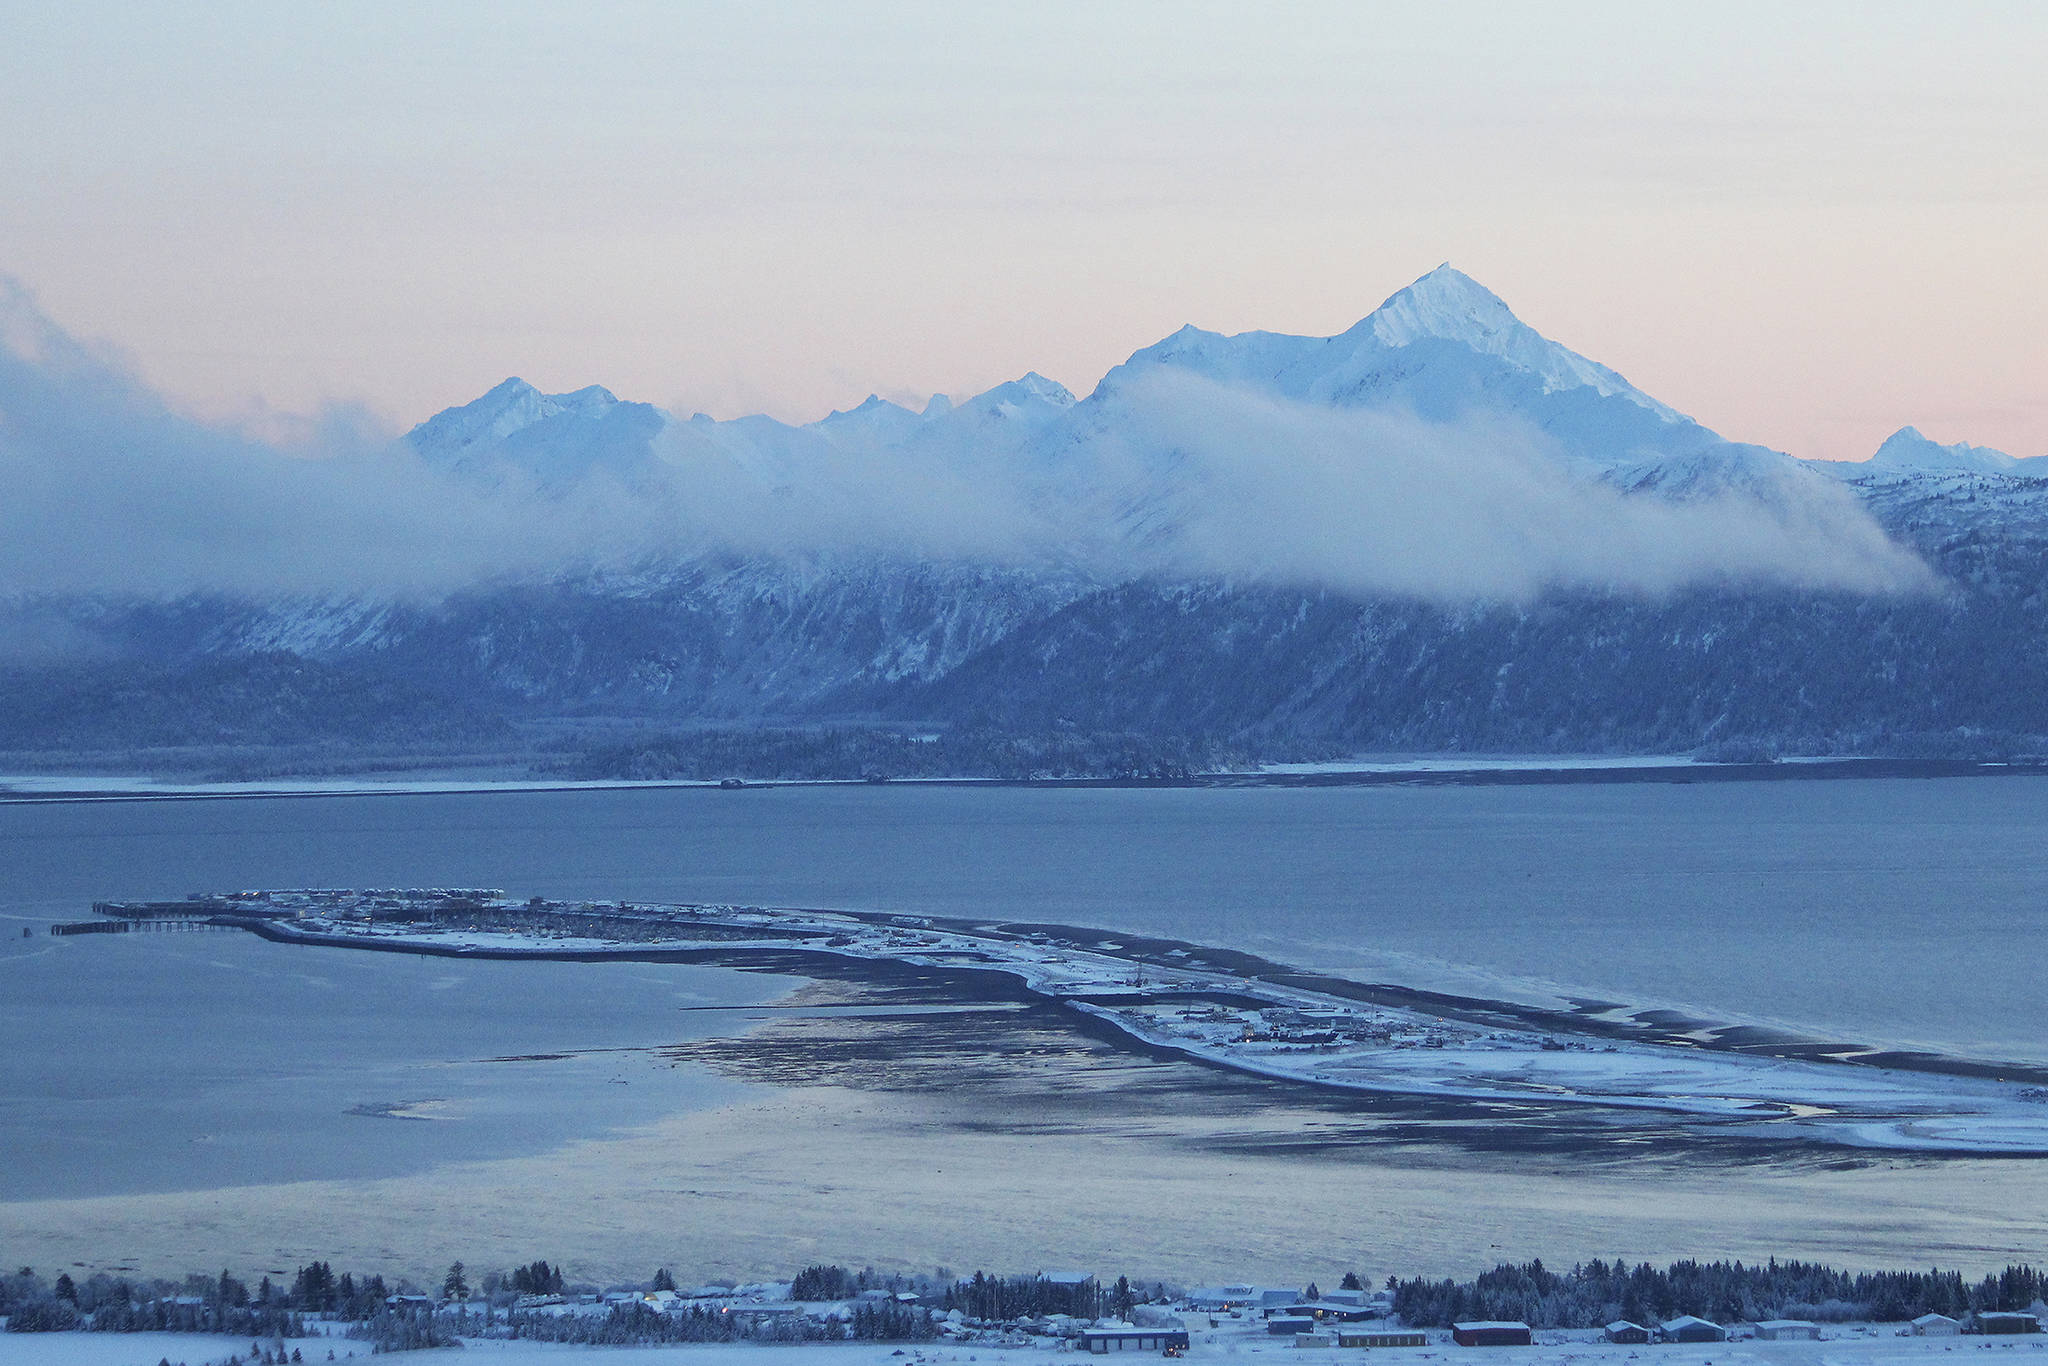 The Homer Spit stretching into Kachemak Bay is seen here on Thursday, Dec. 10, 2020 in Homer, Alaska. (Photo by Megan Pacer/Homer News)